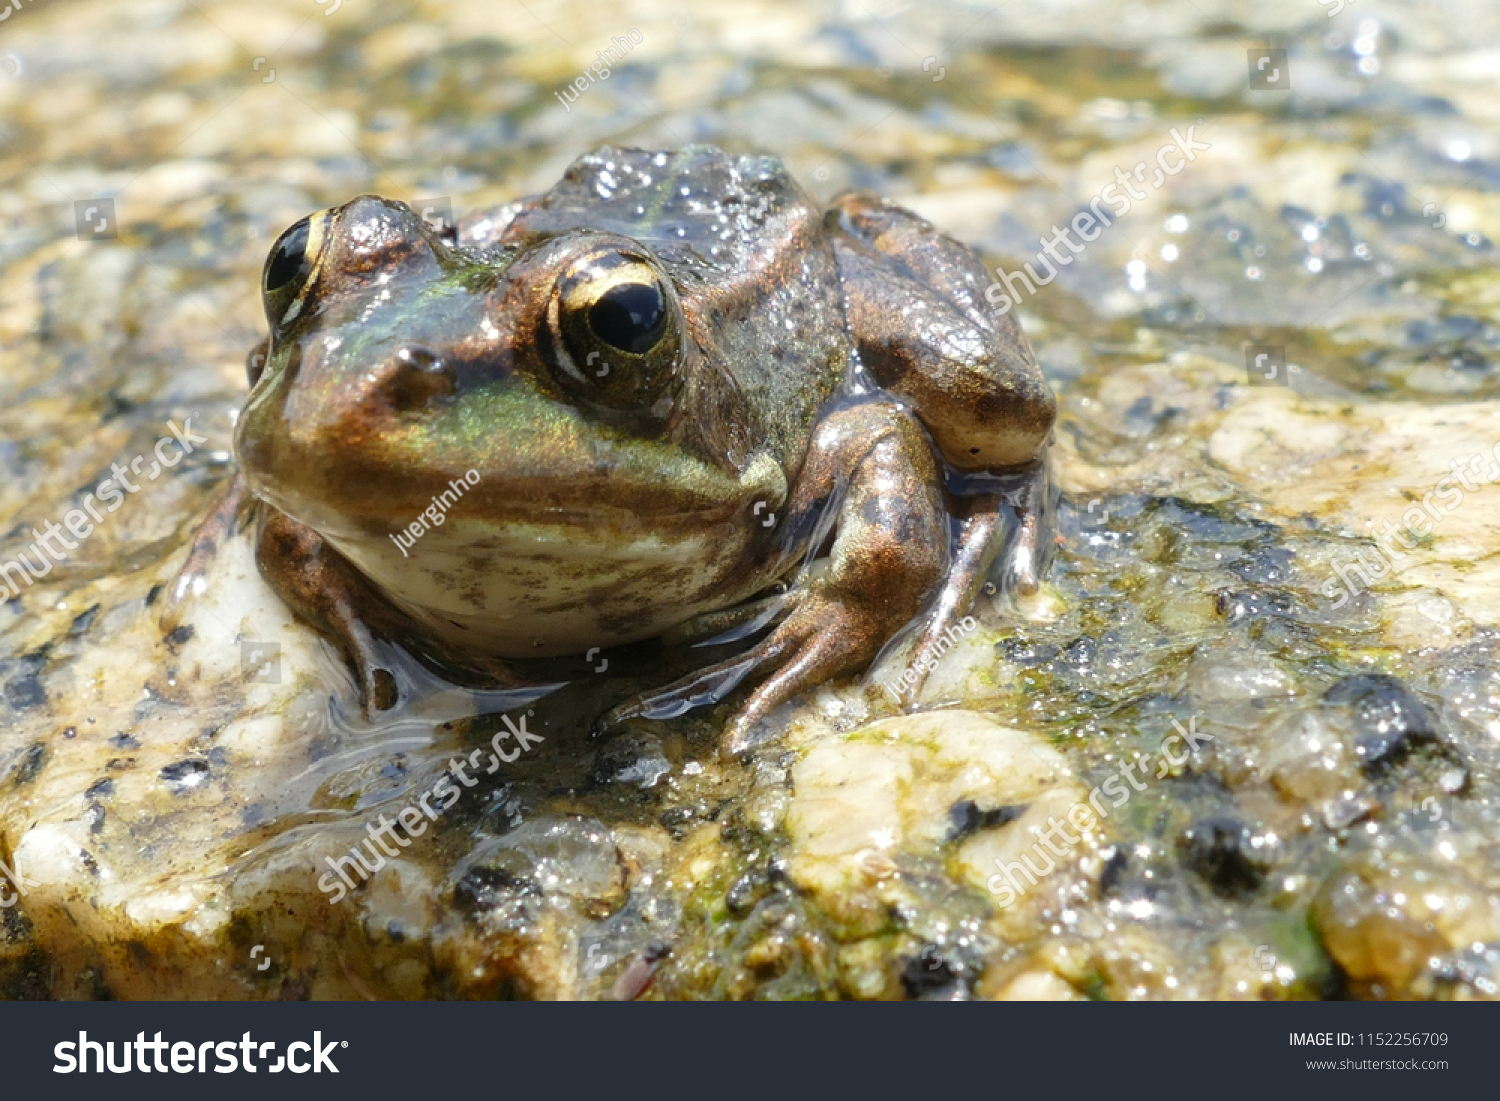 The true frogs, family Ranidae, have the widest distribution of any frog family, here a frog on a stone near the village Balugães, Braga Barcelos district in the North of Portugal.  #1152256709